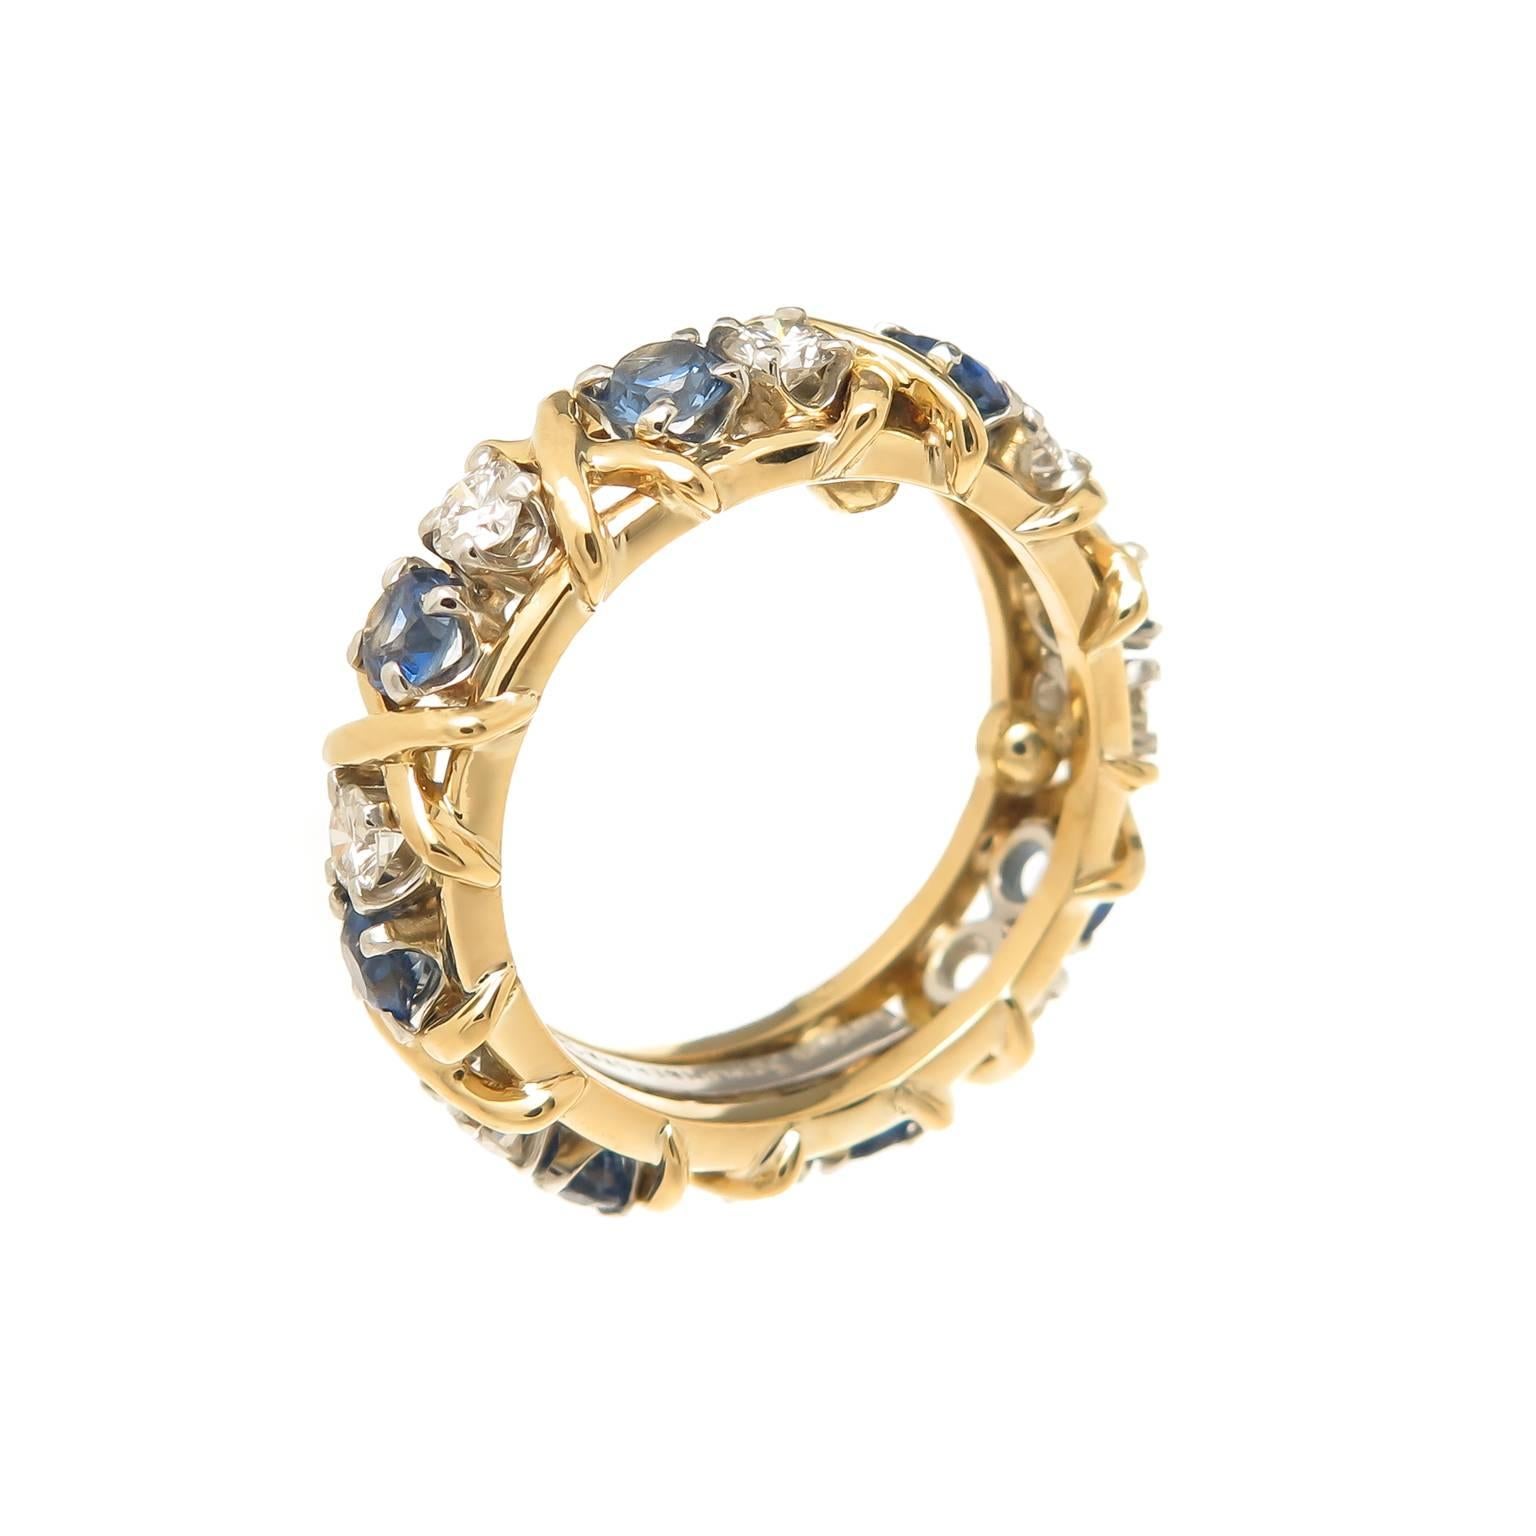 Circa 2000 Jean Schlumber for Tiffany & Company Platinum and 18K yellow Gold Classic X Band Ring. Set with 8  Round Brilliant cut Diamonds and 8 round Sapphires. Measuring 4.5 MM wide. Finger size = 5 1/2 